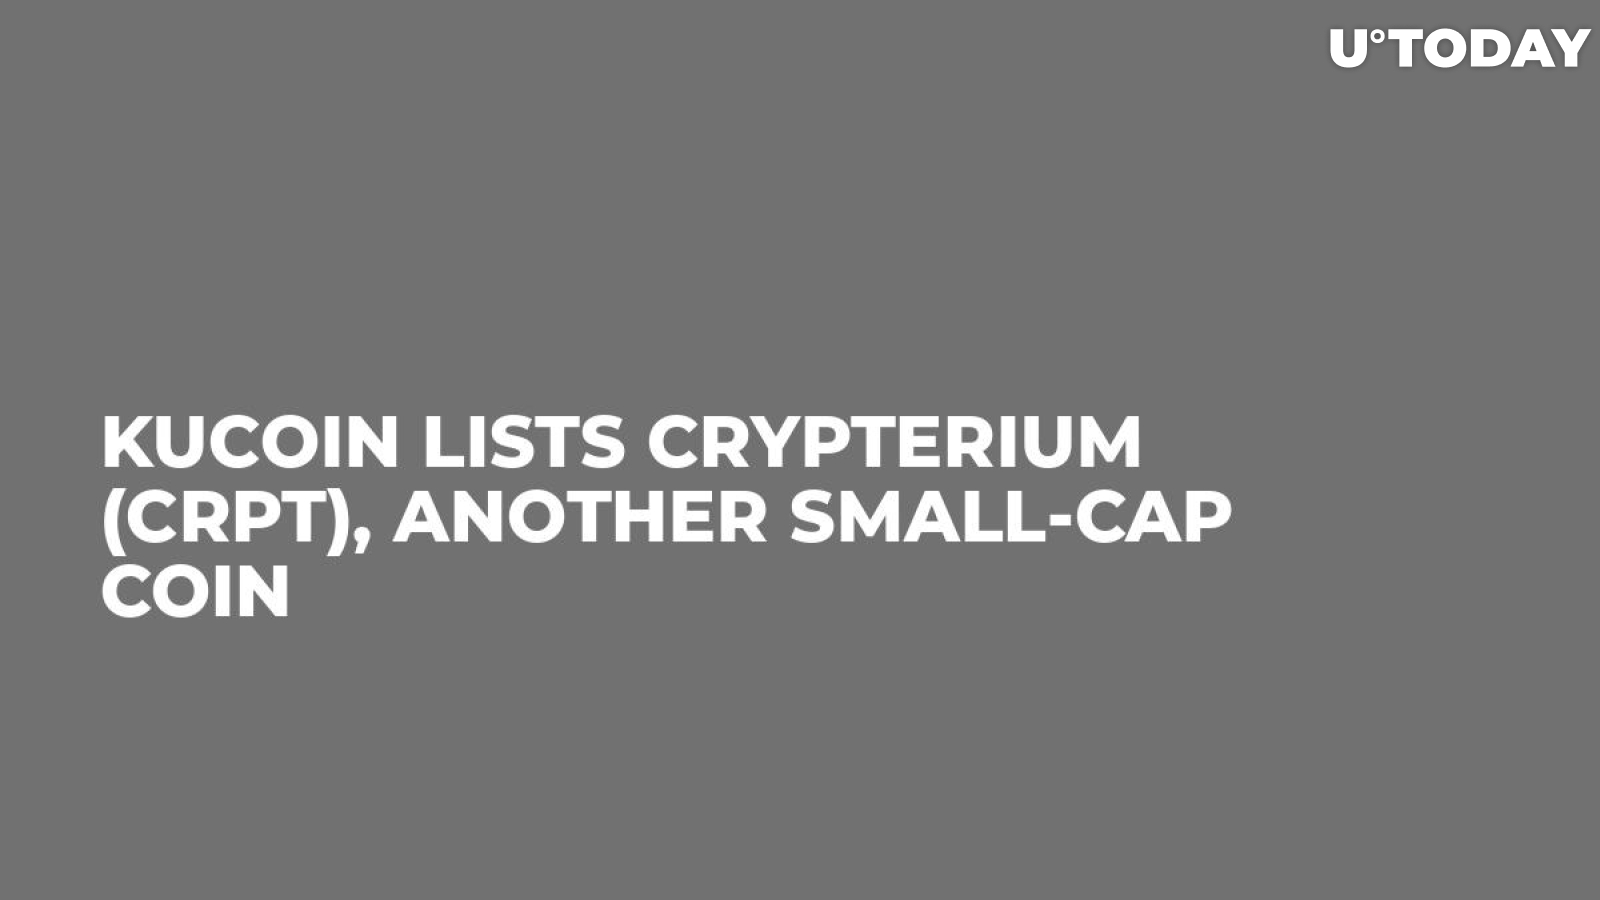 KuCoin Lists Crypterium (CRPT), Another Small-Cap Coin